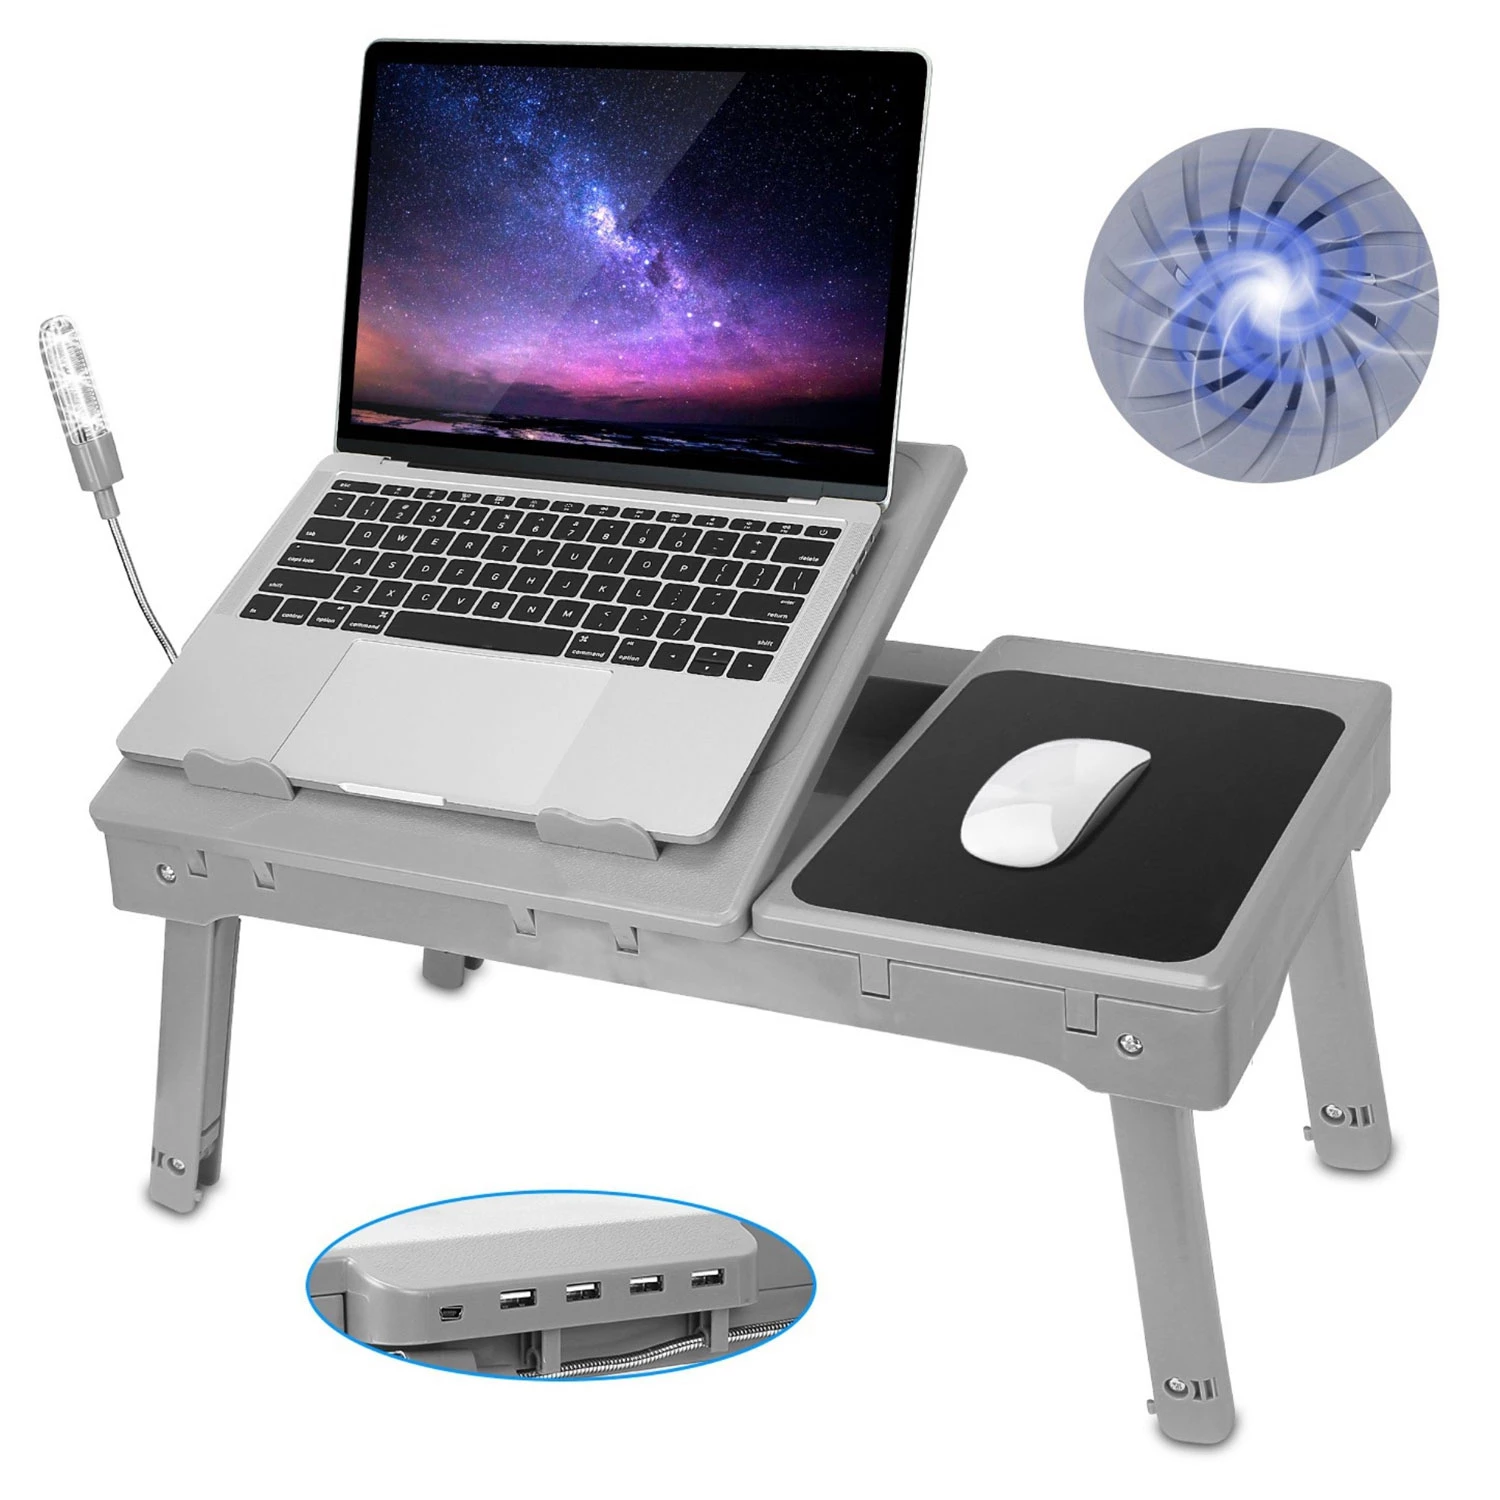 Foldable Laptop Table Bed Desk w/Cooling Fan Mouse Board LED 4 USB Ports